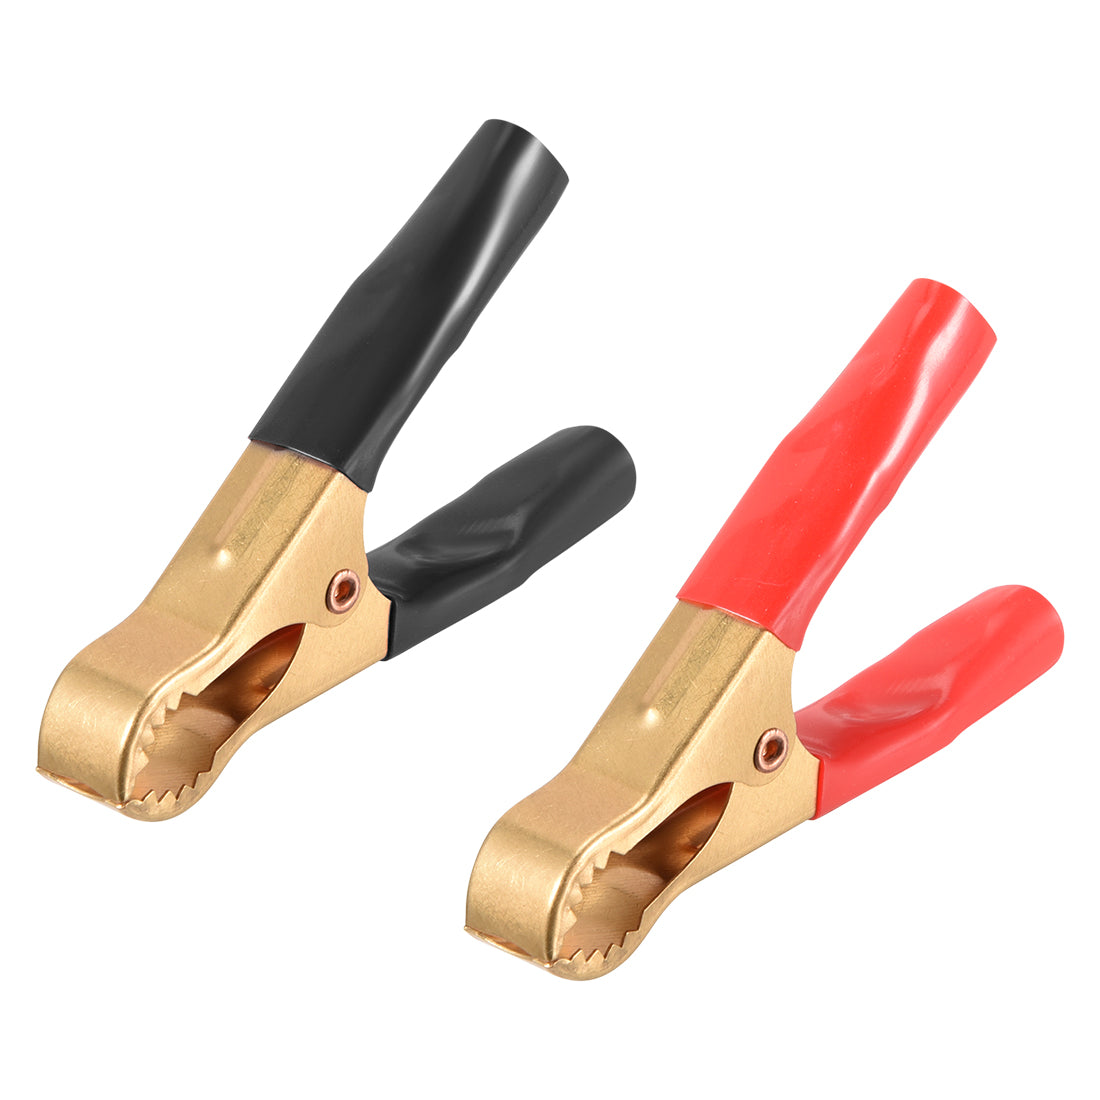 uxcell Uxcell 2 Pcs Pure Copper Alligator Clip Adapter 50A Test Clamp Half Shroud Red Black